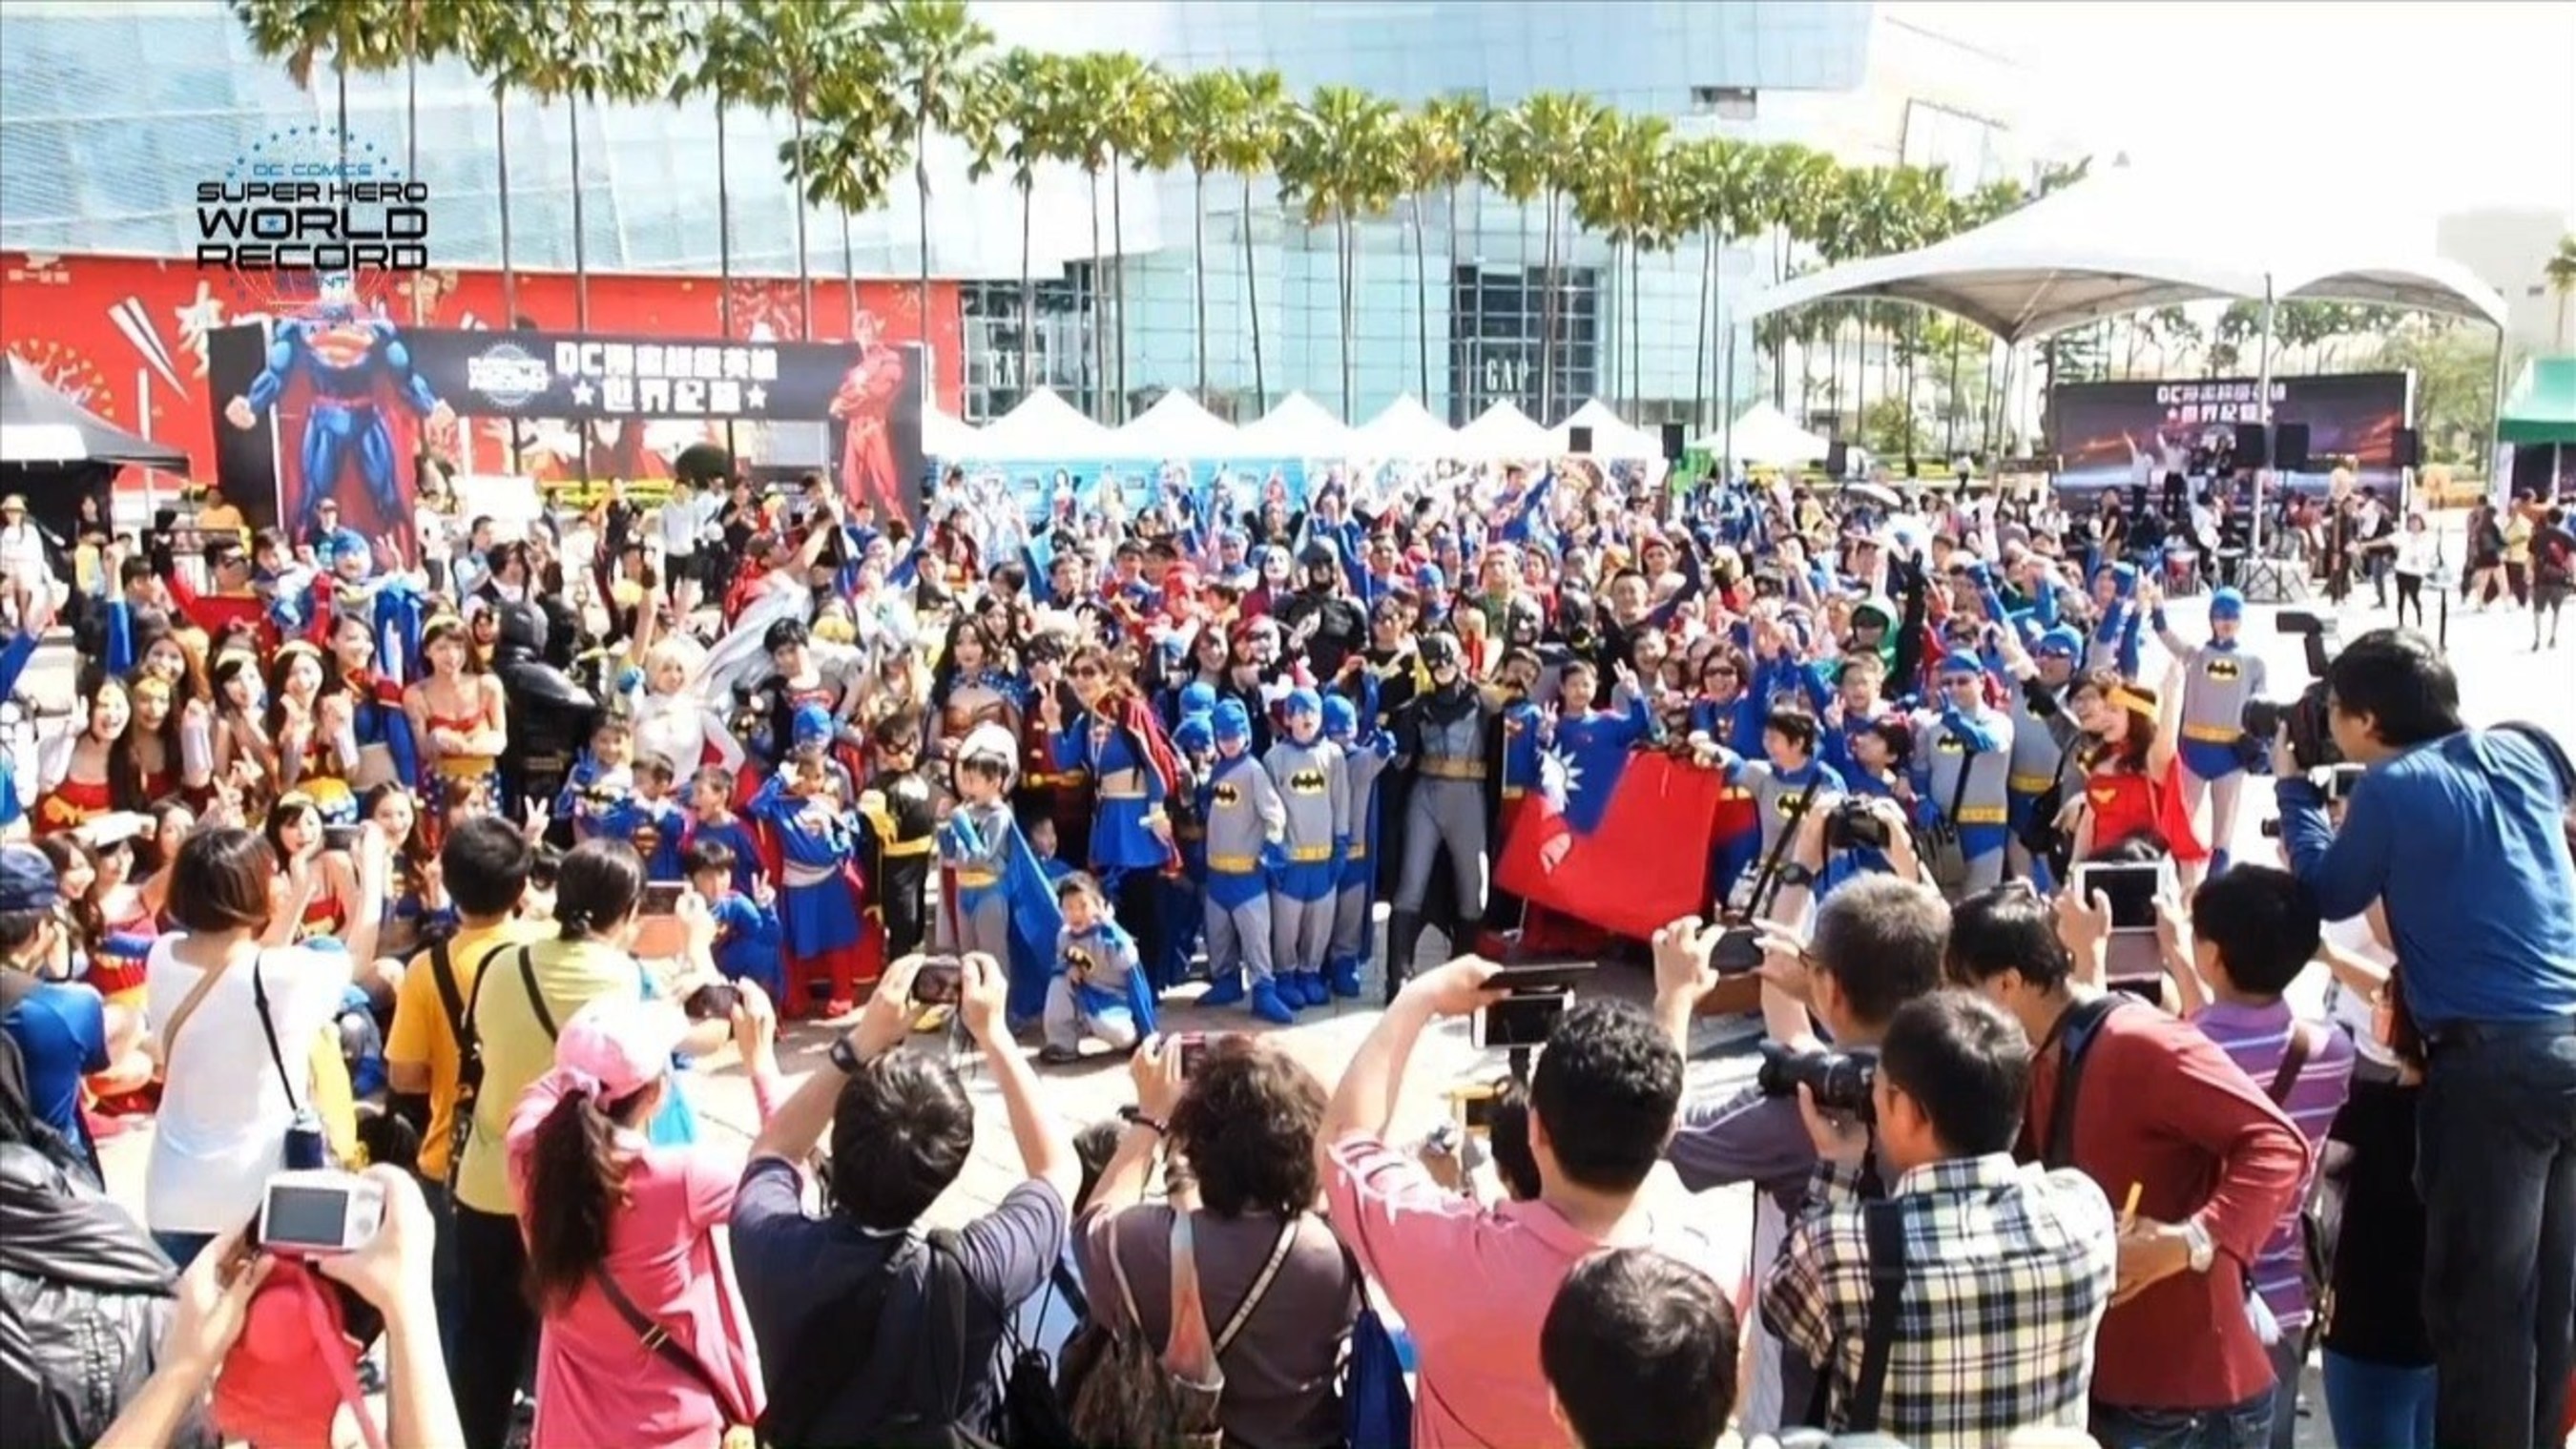 Fans dressed as DC Comics Super Heroes gather to set the Guinness World Record for most people dressed as DC Comics Super Heroes within a 24-hour period at the DC Comics Super Hero World Record Event on April 18, 2015 in Kaohsiung, Taiwan.